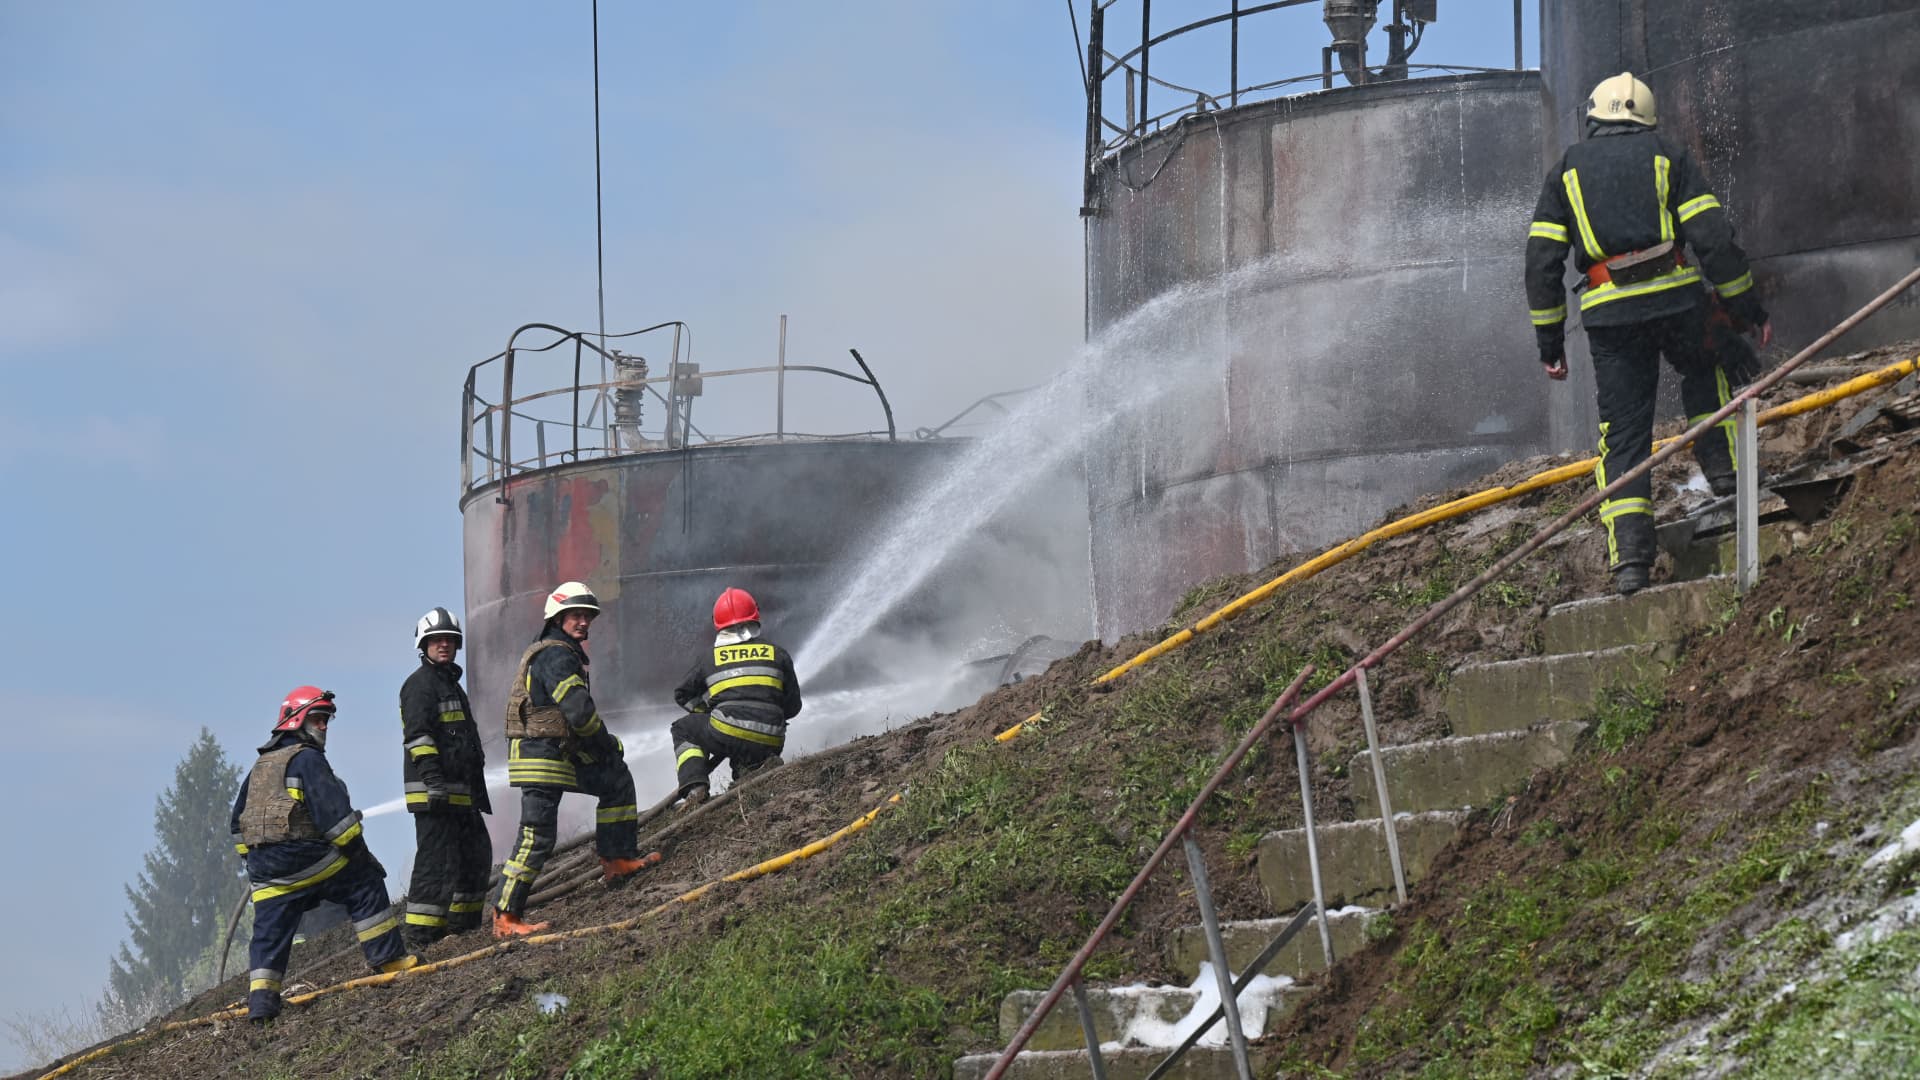 Firefighters are at work to put out a fire at an oil depot near Chuguiv, Kharkiv region, following Russian missiles strikes on April 22, 2022, amid Russian invasion of Ukraine.